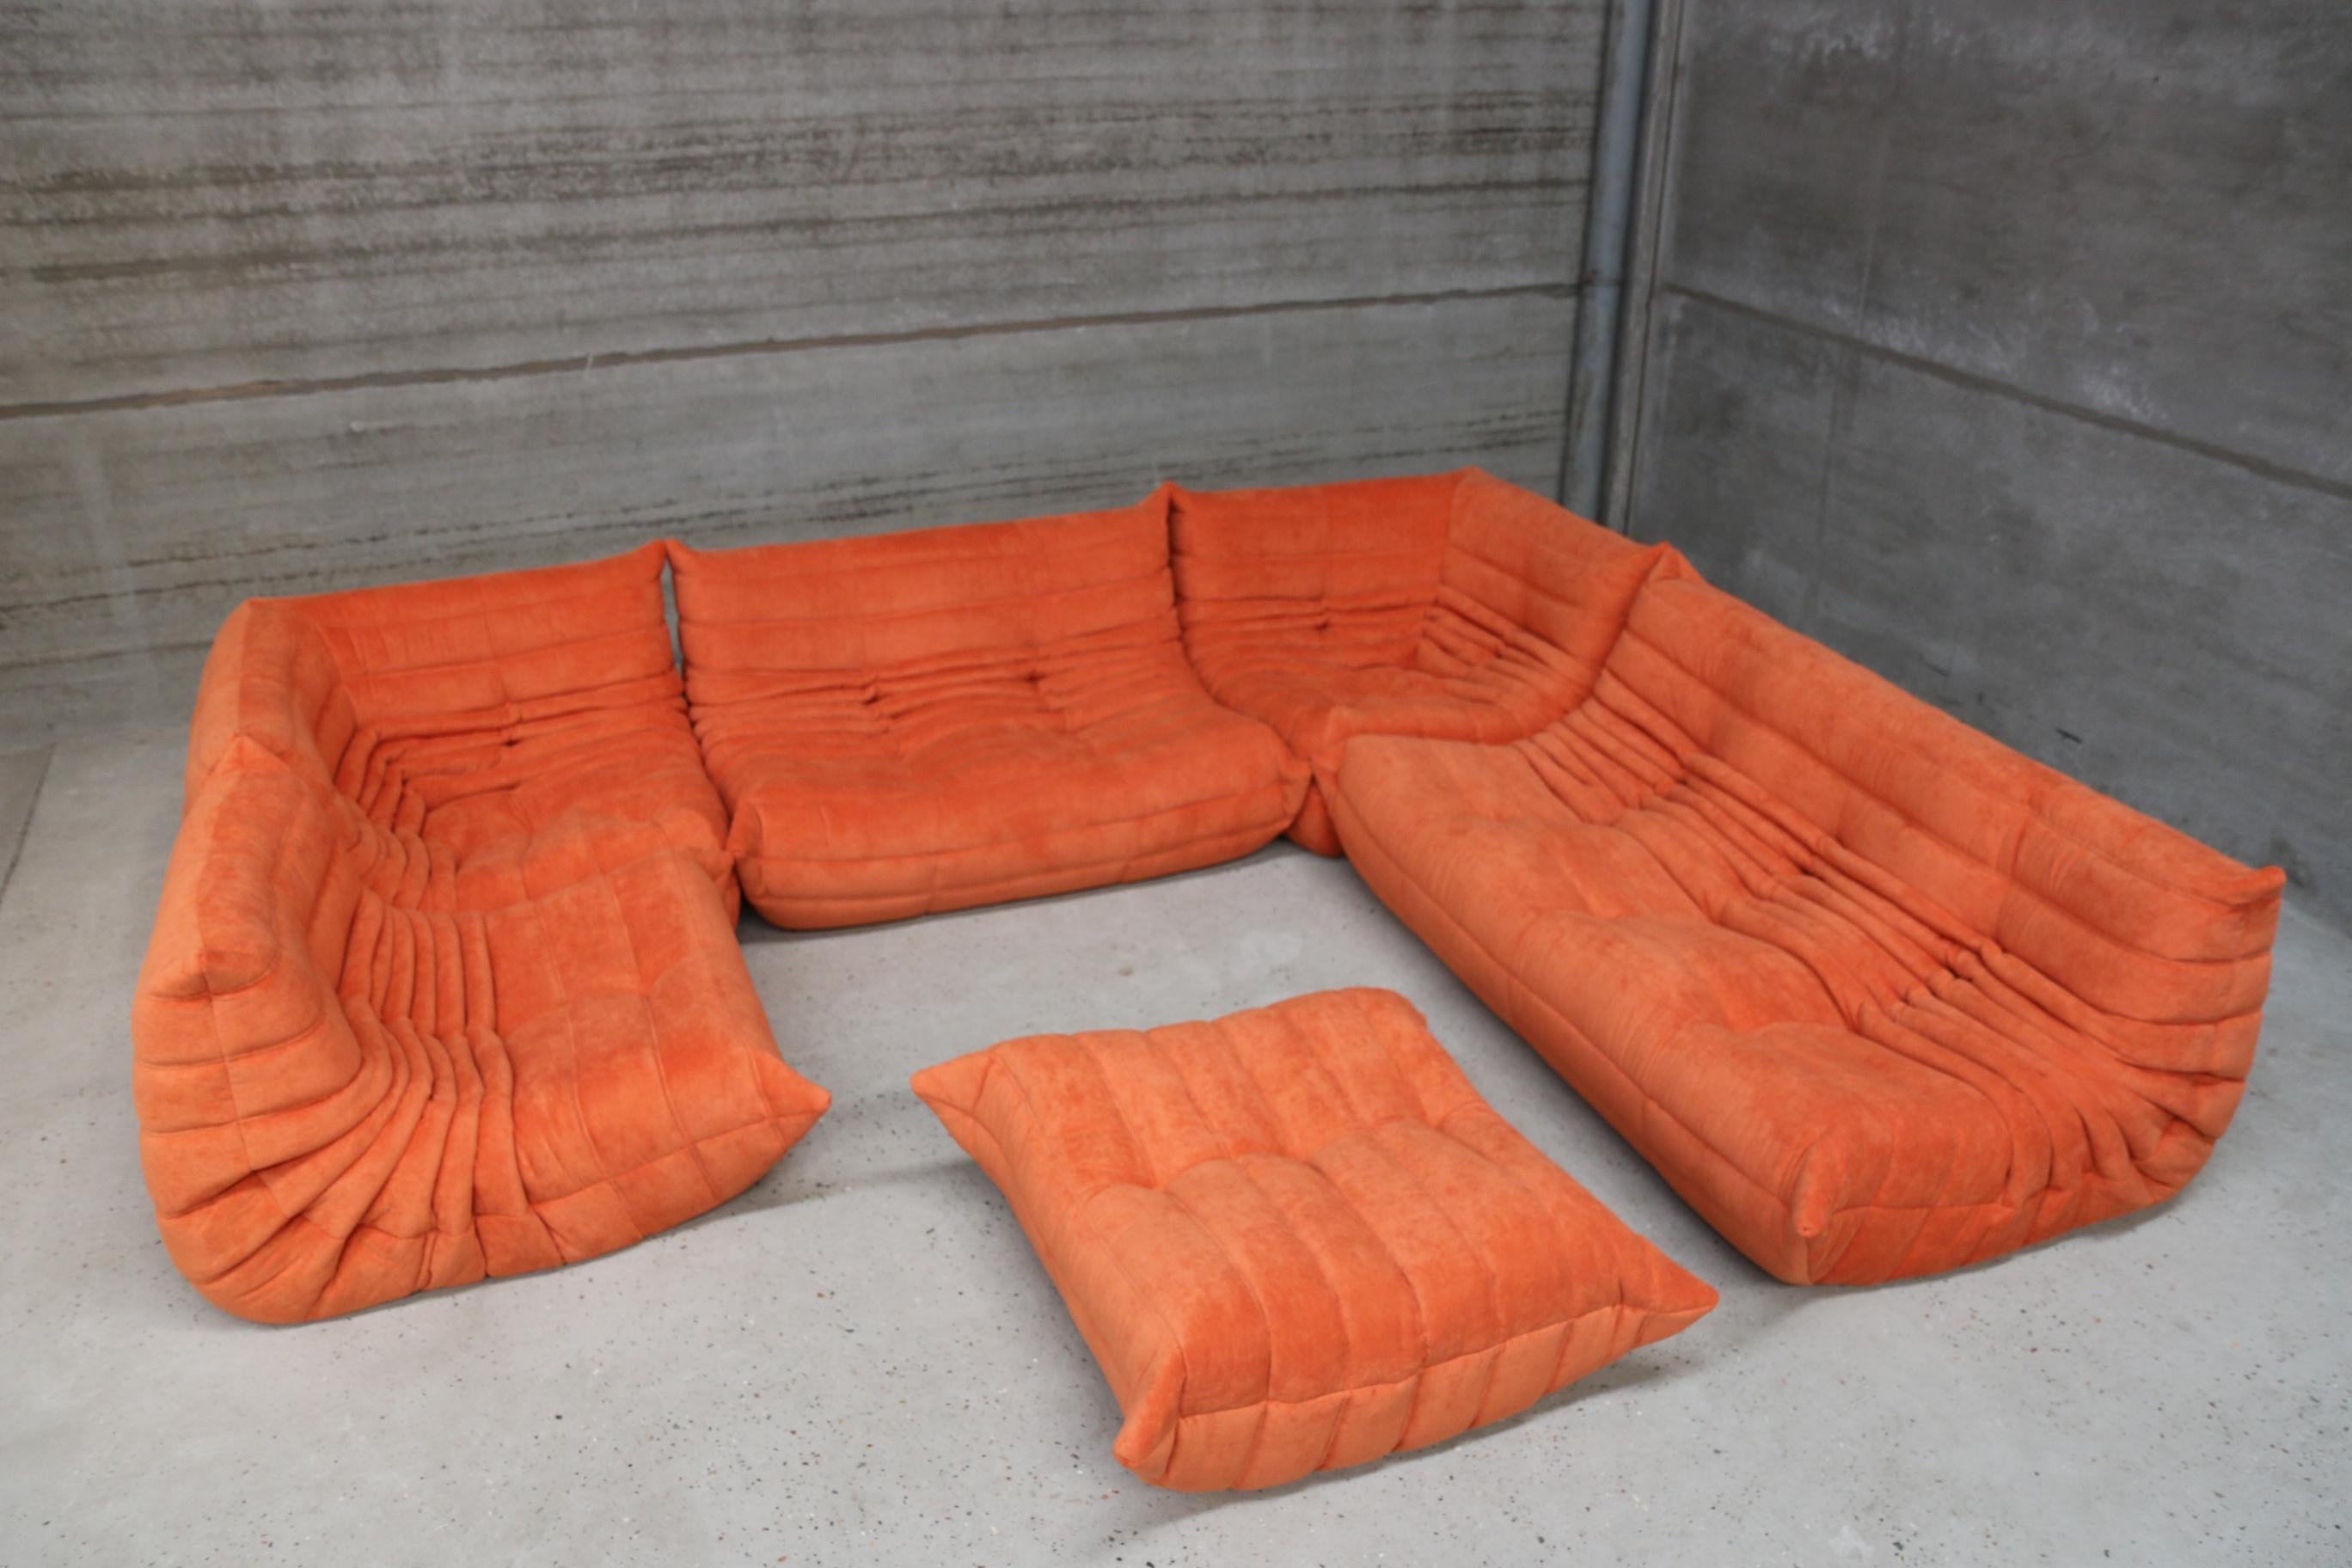 CERTIFIED Ligne Roset TOGO Fireside in Natural Cognac Leather, DIAMOND QUALITY For Sale 4